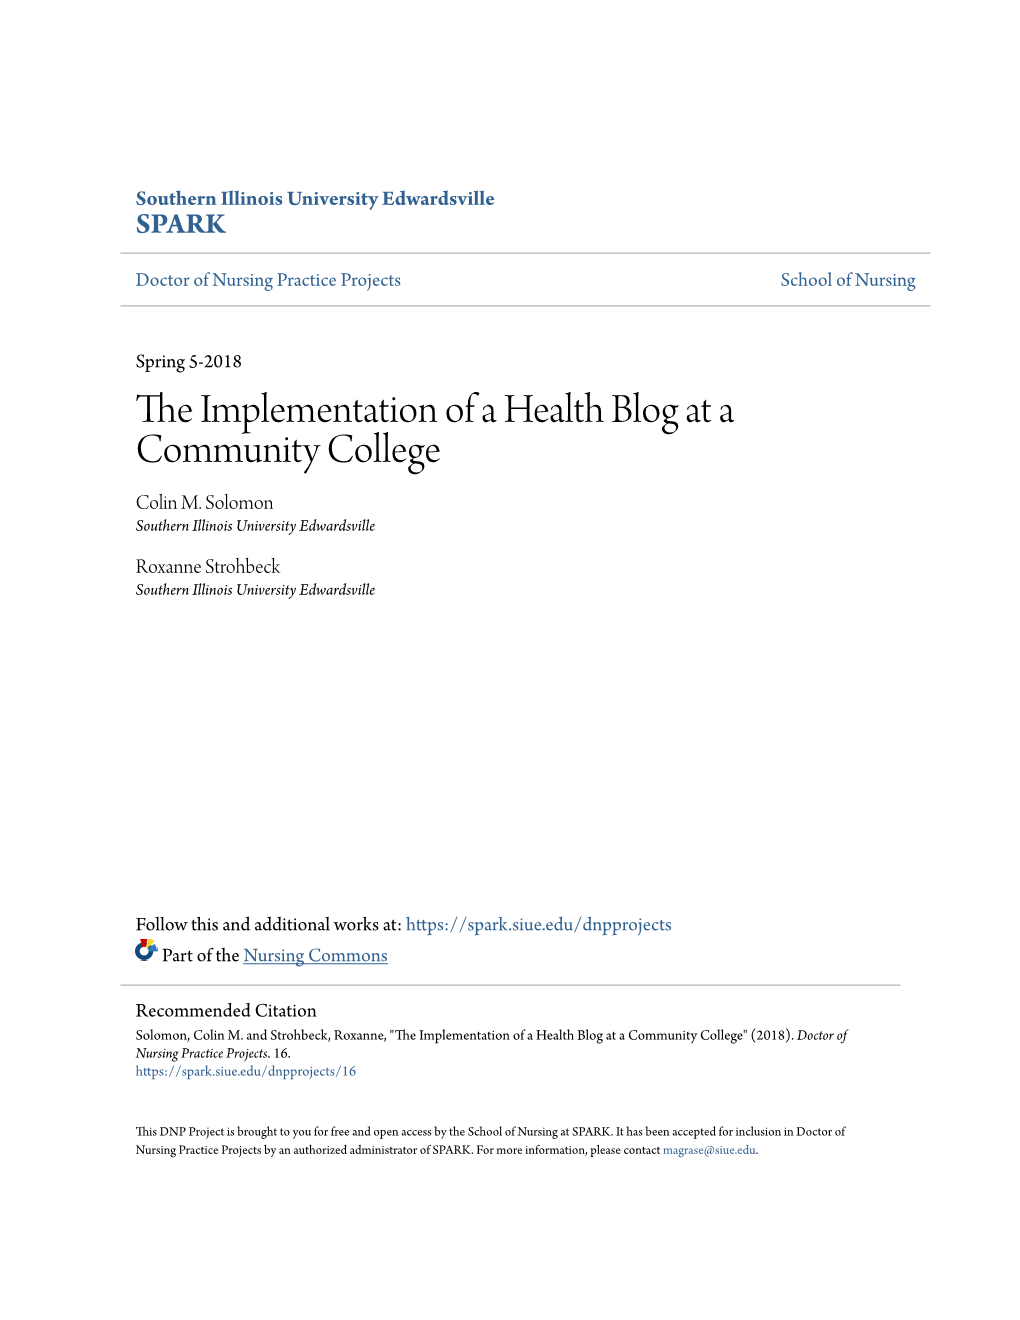 The Implementation of a Health Blog at a Community College